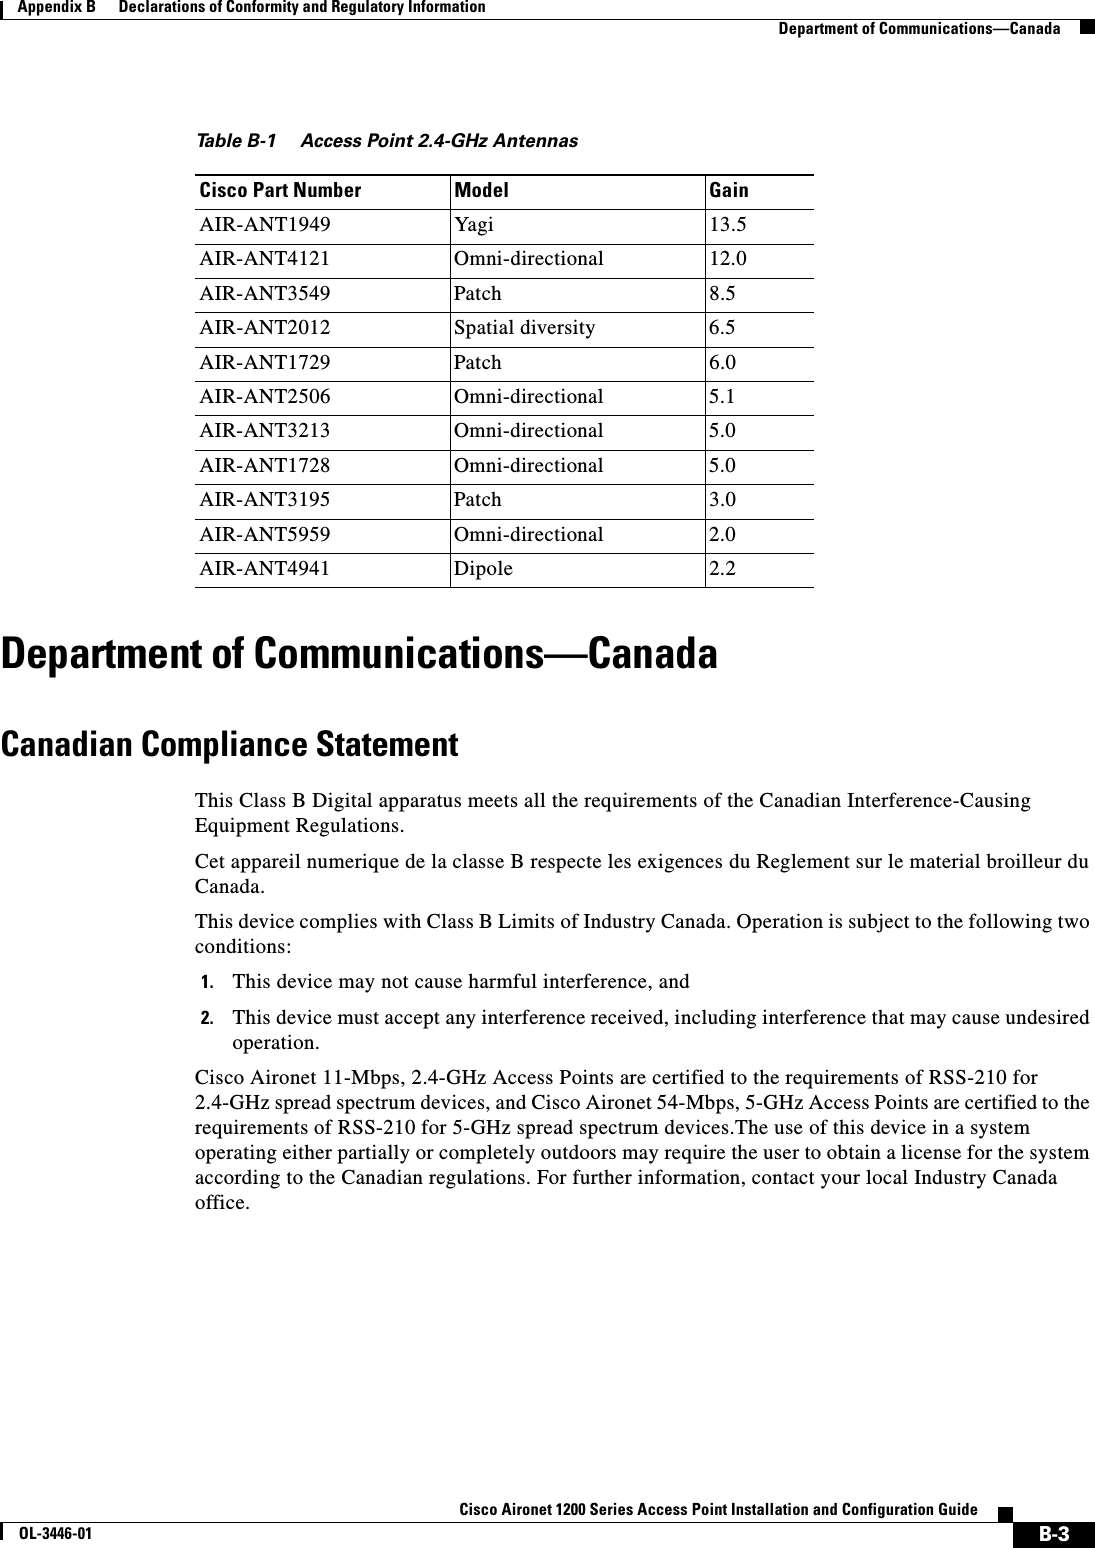 B-3Cisco Aironet 1200 Series Access Point Installation and Configuration GuideOL-3446-01Appendix B      Declarations of Conformity and Regulatory InformationDepartment of Communications—CanadaDepartment of Communications—CanadaCanadian Compliance StatementThis Class B Digital apparatus meets all the requirements of the Canadian Interference-Causing Equipment Regulations.Cet appareil numerique de la classe B respecte les exigences du Reglement sur le material broilleur du Canada.This device complies with Class B Limits of Industry Canada. Operation is subject to the following two conditions:1. This device may not cause harmful interference, and2. This device must accept any interference received, including interference that may cause undesired operation.Cisco Aironet 11-Mbps, 2.4-GHz Access Points are certified to the requirements of RSS-210 for 2.4-GHz spread spectrum devices, and Cisco Aironet 54-Mbps, 5-GHz Access Points are certified to the requirements of RSS-210 for 5-GHz spread spectrum devices.The use of this device in a system operating either partially or completely outdoors may require the user to obtain a license for the system according to the Canadian regulations. For further information, contact your local Industry Canada office.Table B-1 Access Point 2.4-GHz AntennasCisco Part Number Model GainAIR-ANT1949 Yagi 13.5AIR-ANT4121 Omni-directional 12.0AIR-ANT3549 Patch 8.5AIR-ANT2012 Spatial diversity 6.5AIR-ANT1729 Patch 6.0AIR-ANT2506 Omni-directional 5.1AIR-ANT3213 Omni-directional 5.0AIR-ANT1728 Omni-directional 5.0AIR-ANT3195 Patch 3.0AIR-ANT5959 Omni-directional 2.0AIR-ANT4941 Dipole 2.2